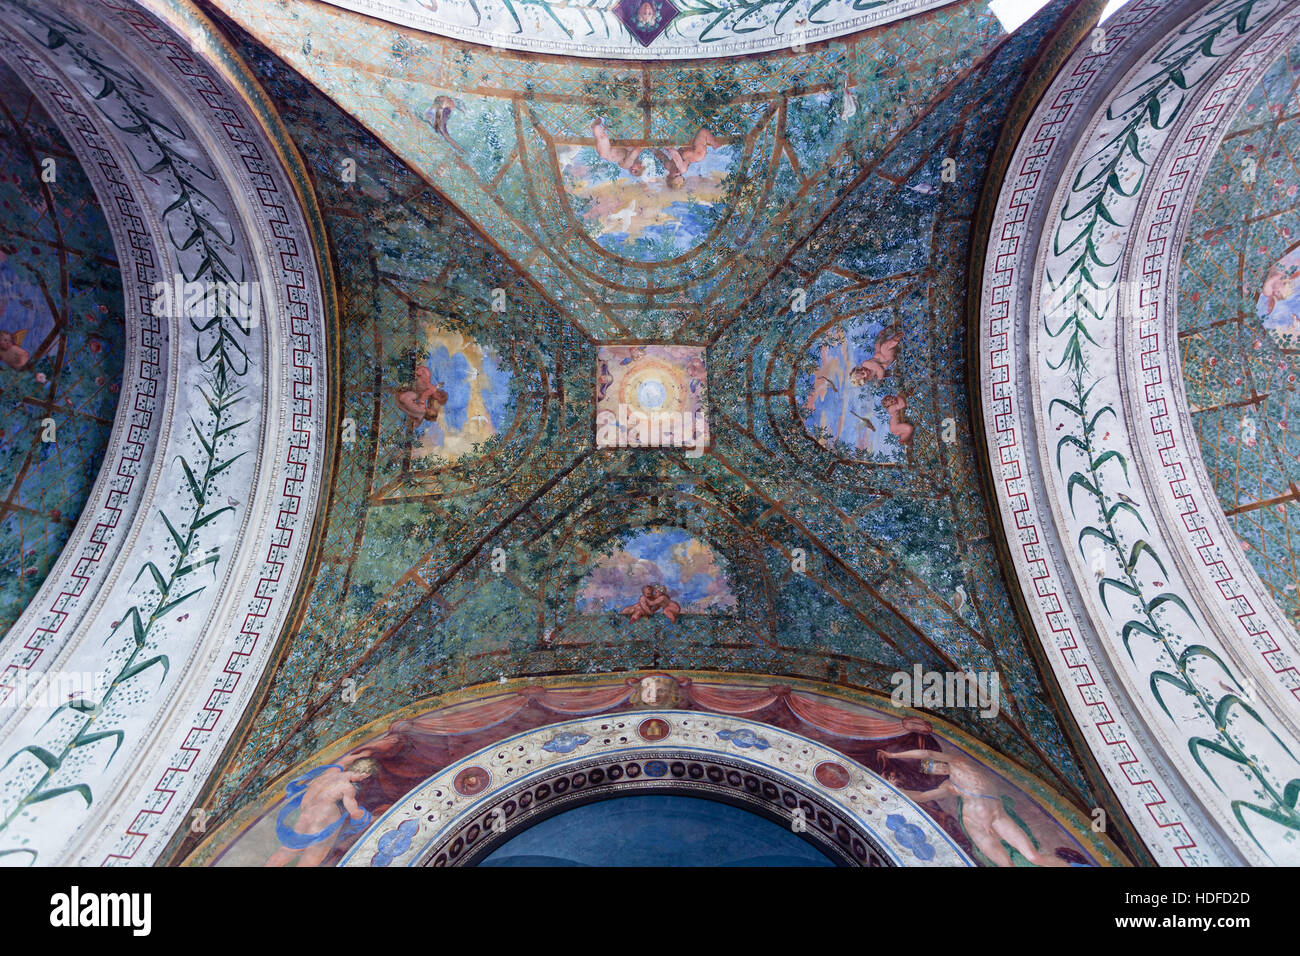 ROME, ITALY - NOVEMBER 1, 2016: ceiling of arcade in Villa Giulia, Museo Nazionale Etrusco (National Etruscan Museum), big collection of Etruscan art Stock Photo